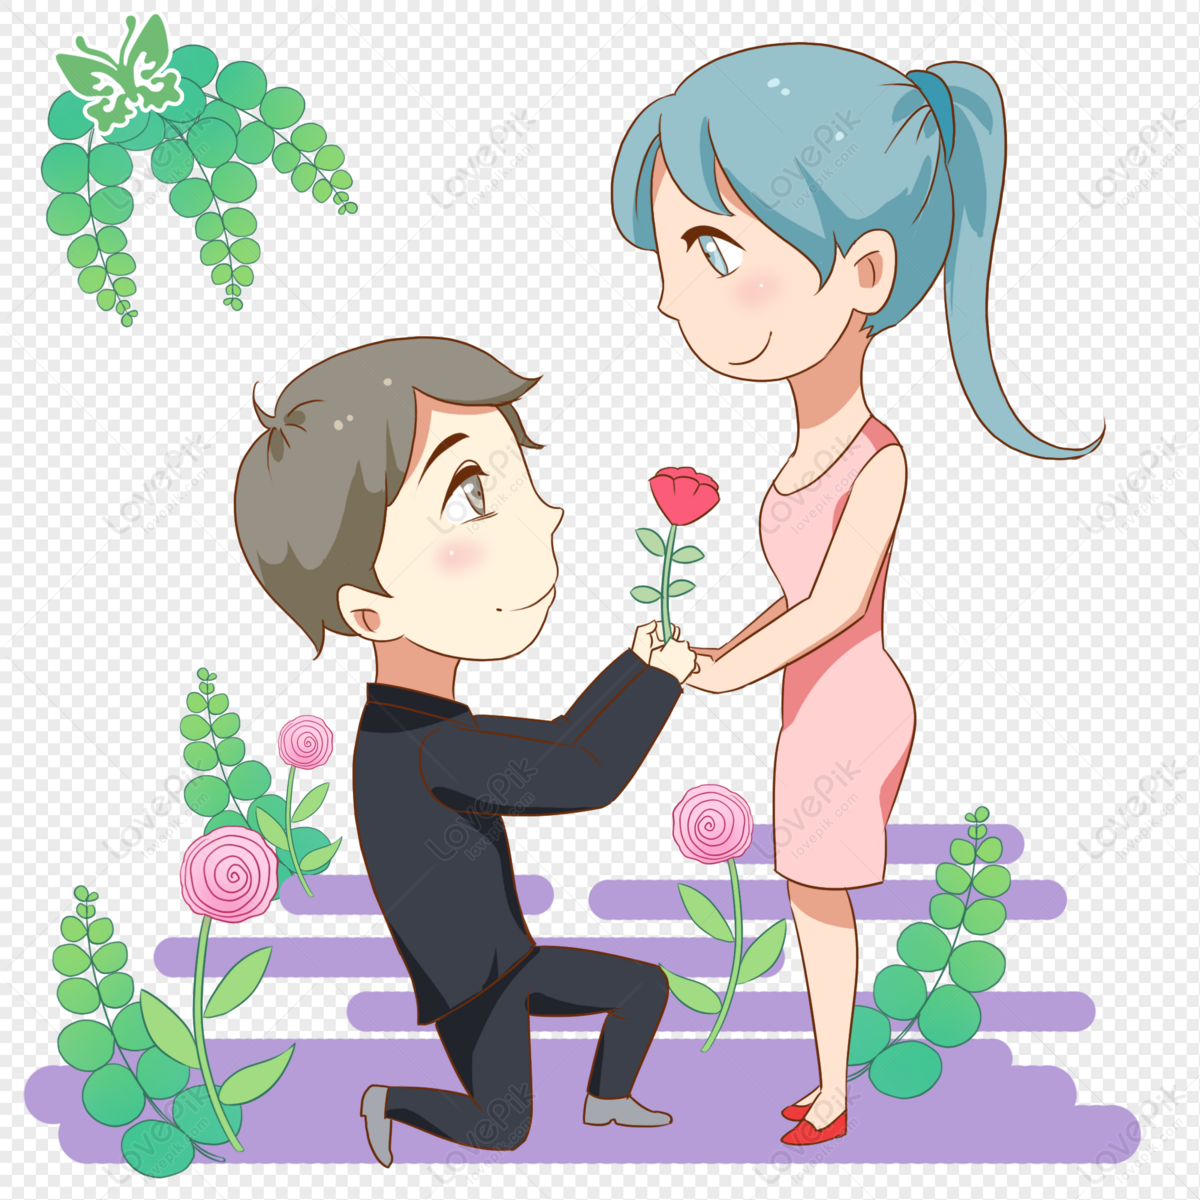 Boy Proposing To A Girl PNG Picture And Clipart Image For Free ...